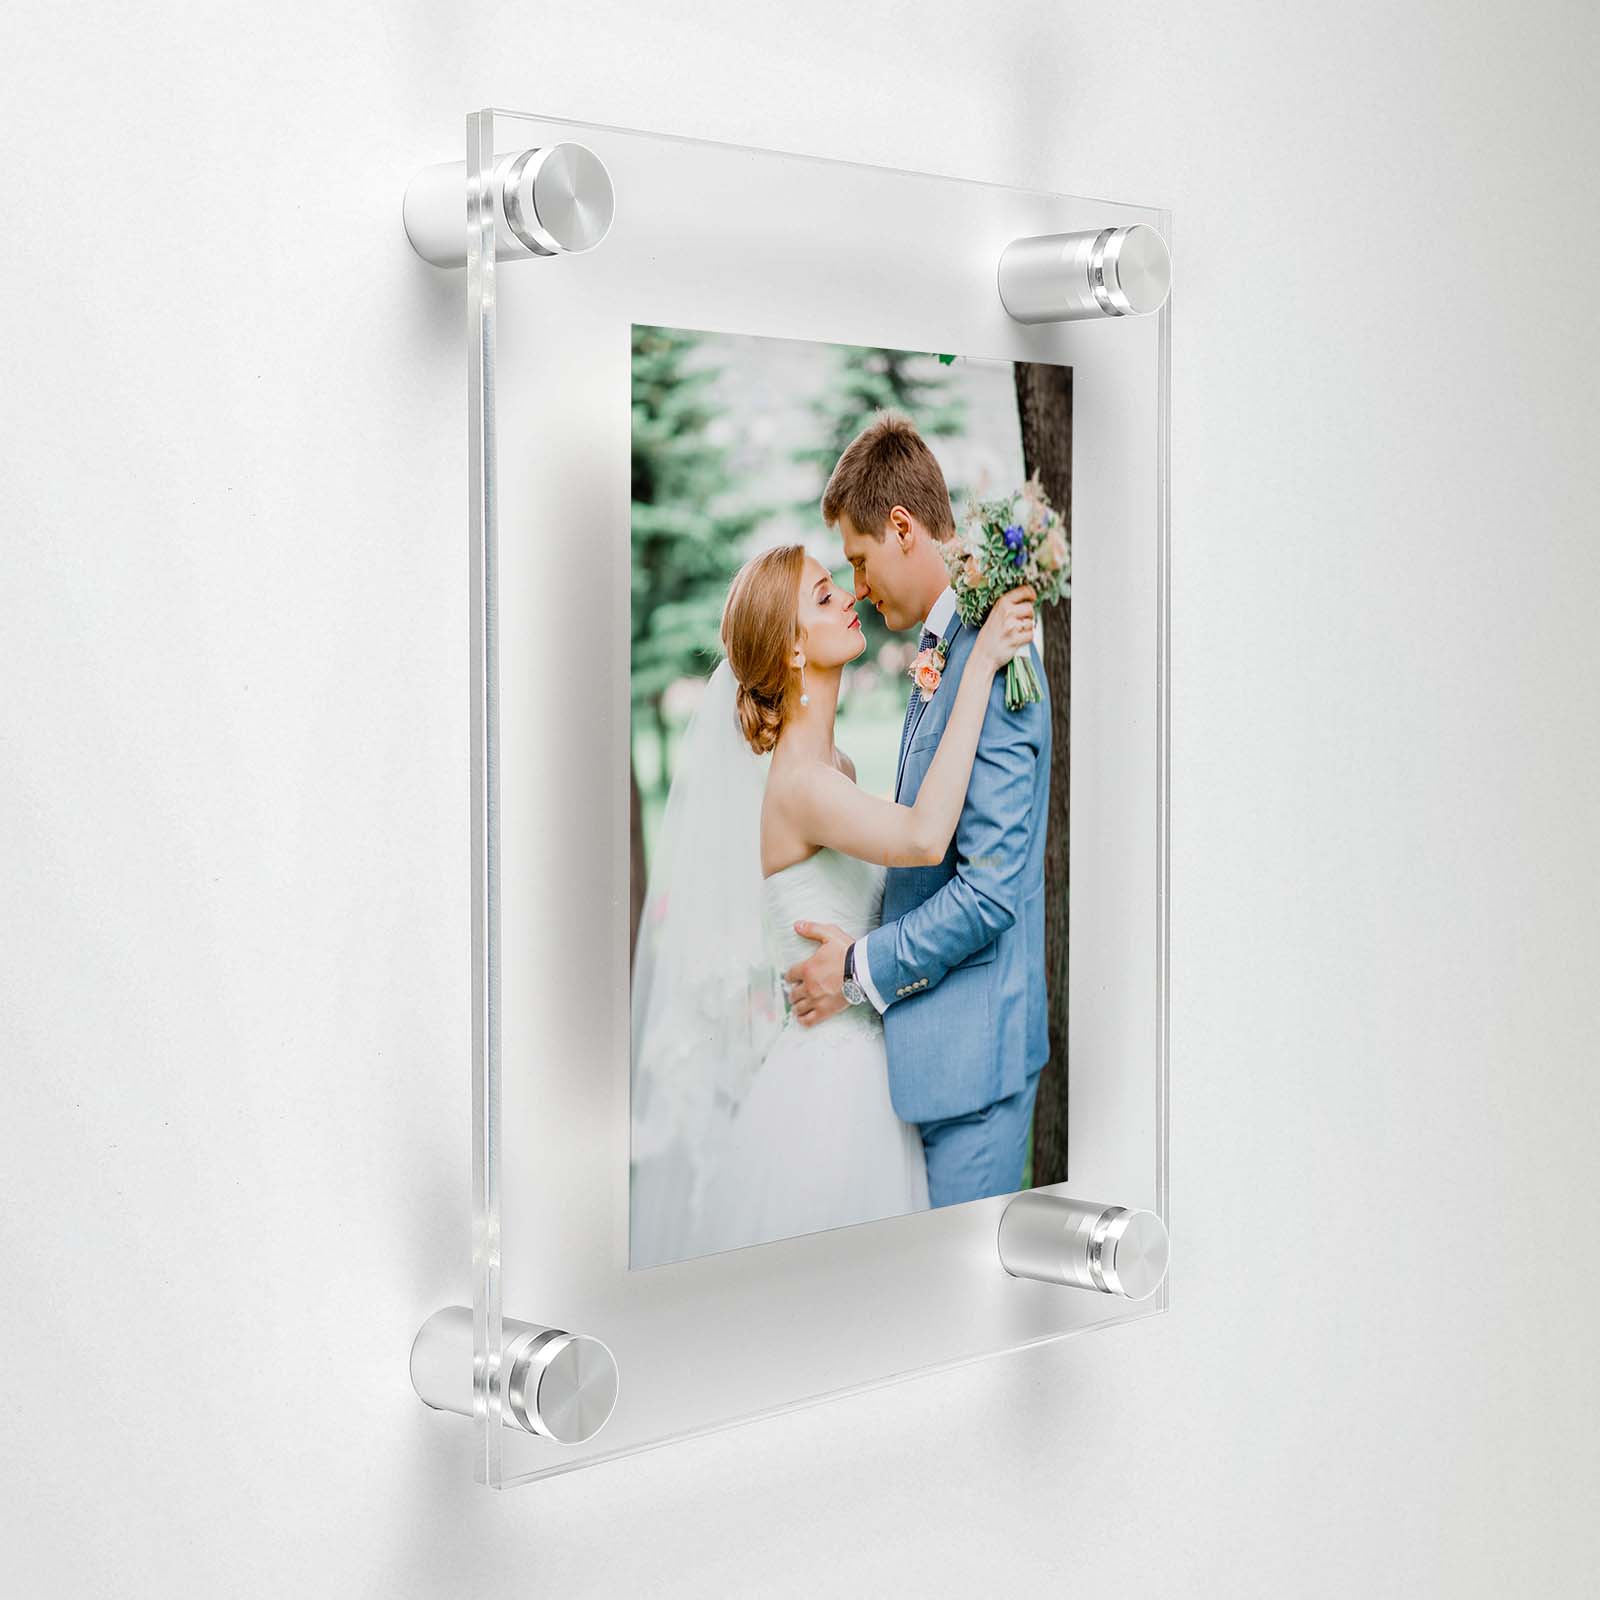 (2) 13-1/2'' x 16-1/2'' Clear Acrylics , Pre-Drilled With Polished Edges (Thick 1/8'' each), Wall Frame with (4) 3/4'' x 3/4'' Silver Anodized Aluminum Standoffs includes Screws and Anchors